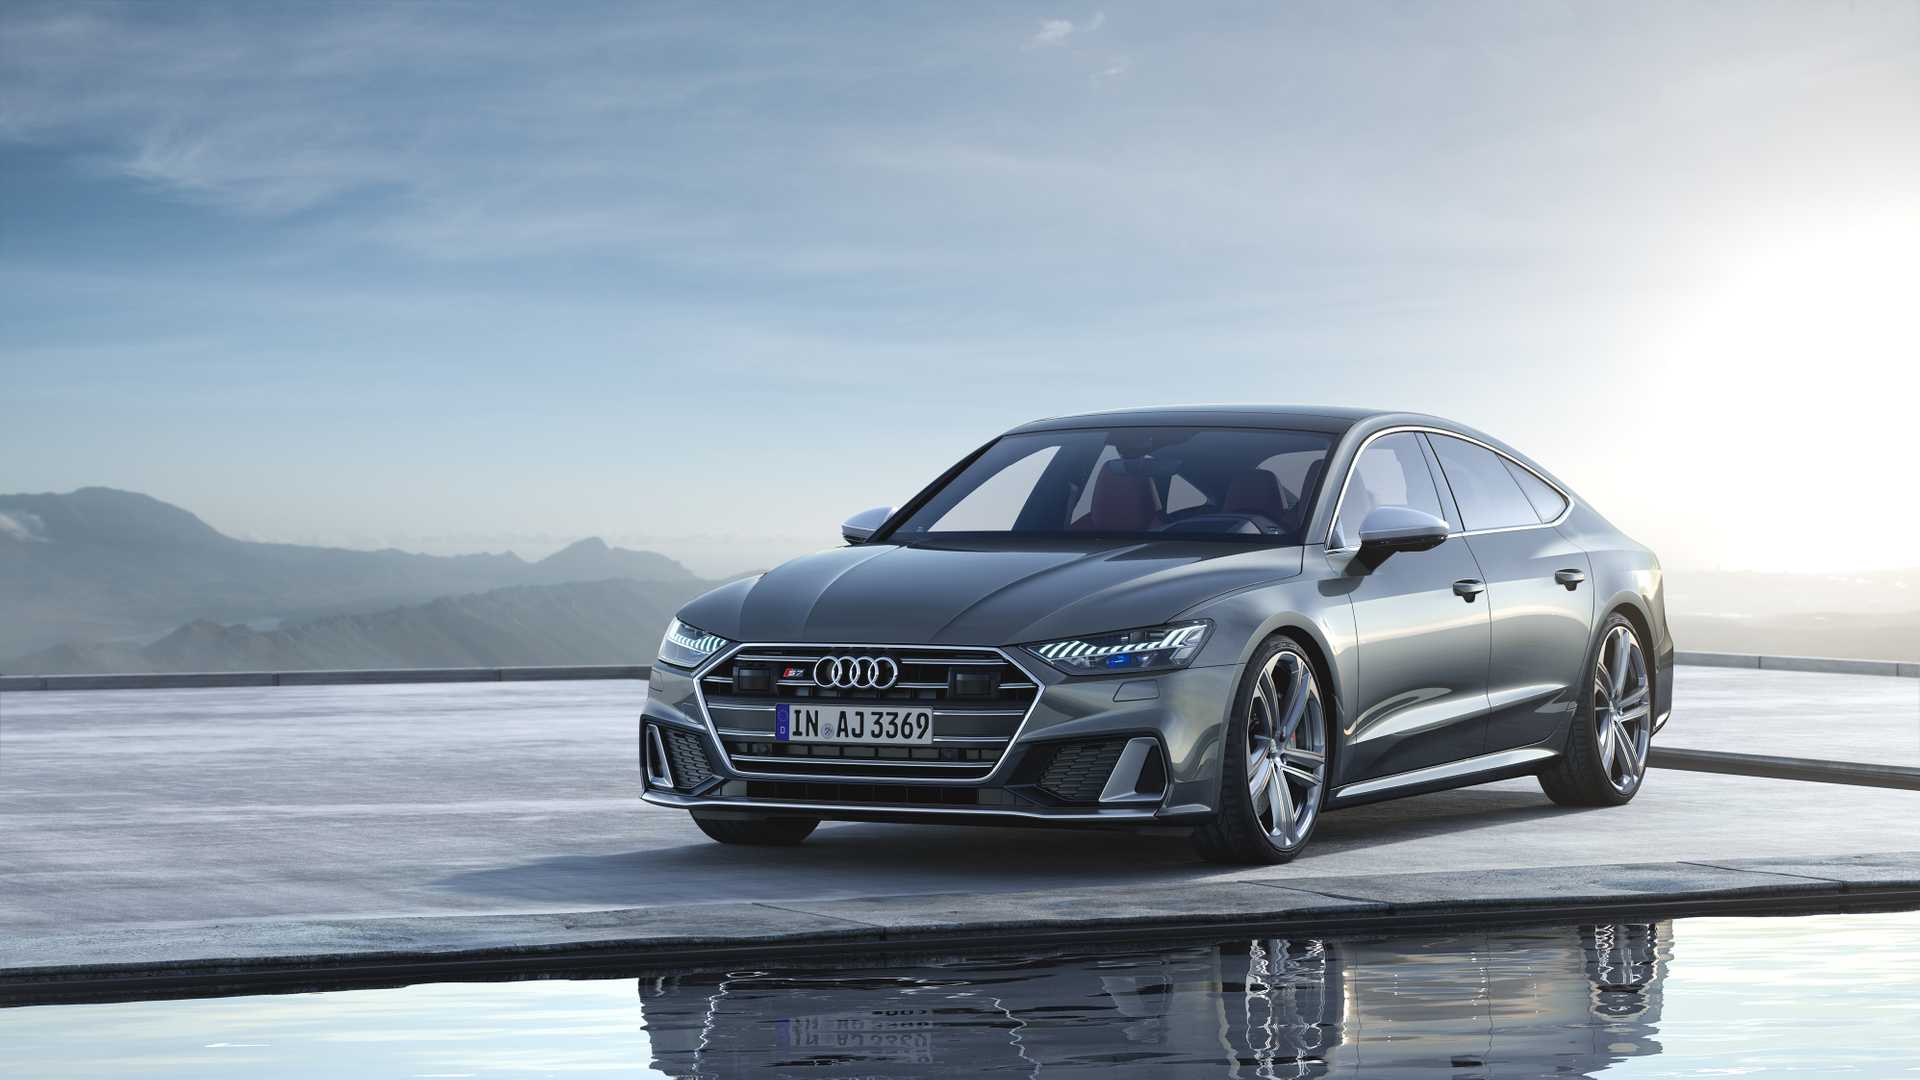 Audi S6 And S7 Revealed: TDI For Europe; TFSI For U.S